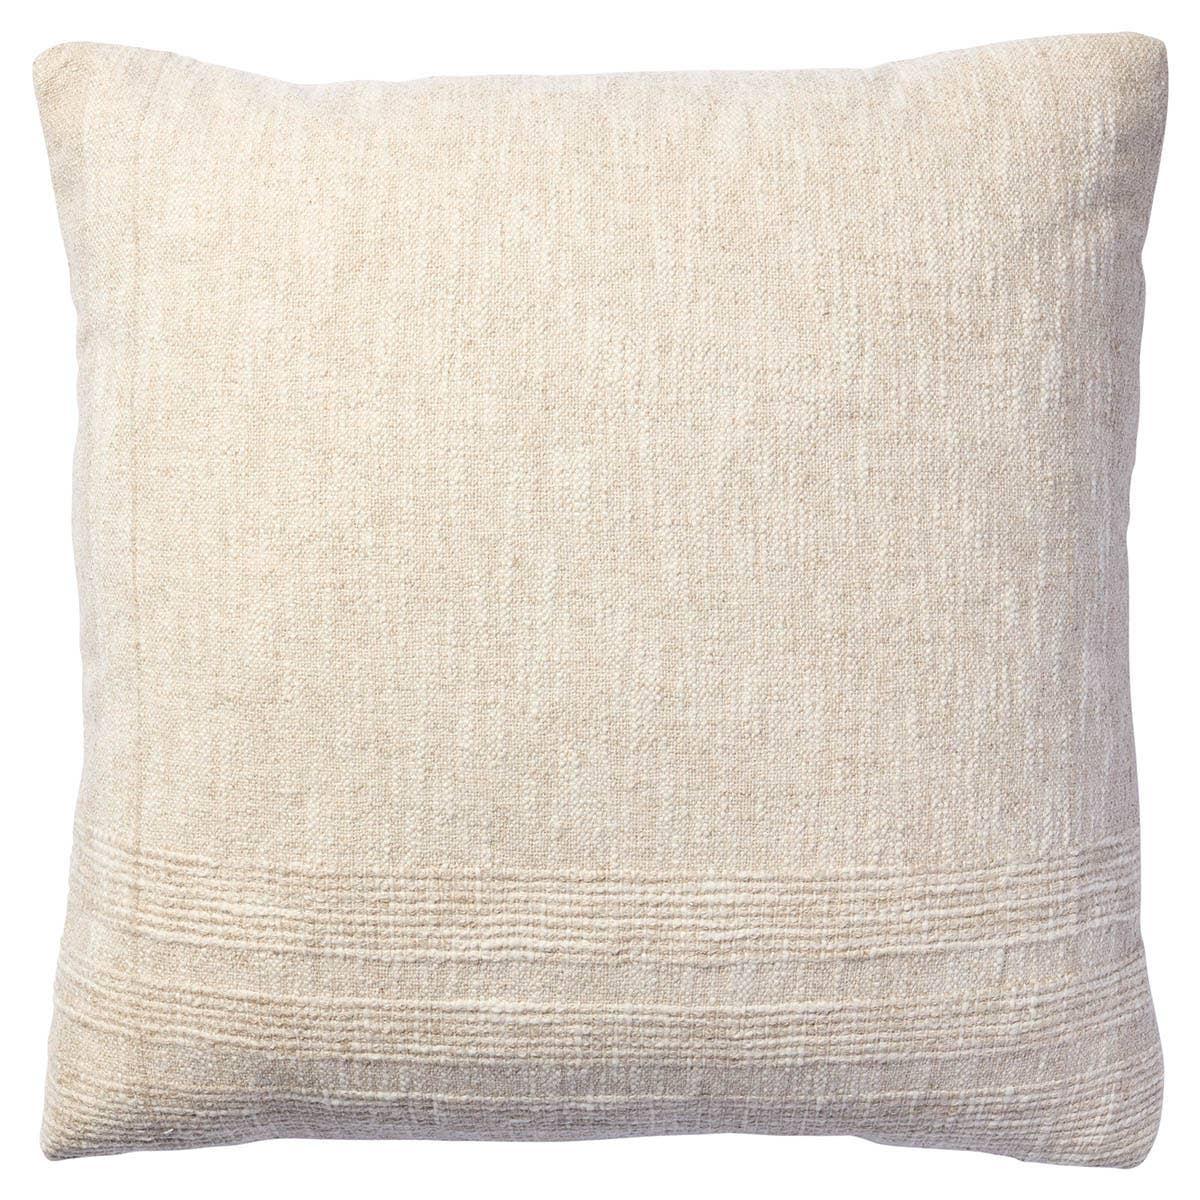 The handcrafted Novia pillow stuns with simple elegance. Full of texture yet soft to the touch, this cream and beige throw pillow suits any indoor space. The cotton, linen and viscose blend adds comfort while maintaining style.Indoor Pillow Amethyst Home provides interior design, new home construction design consulting, vintage area rugs, and lighting in the Scottsdale metro area.